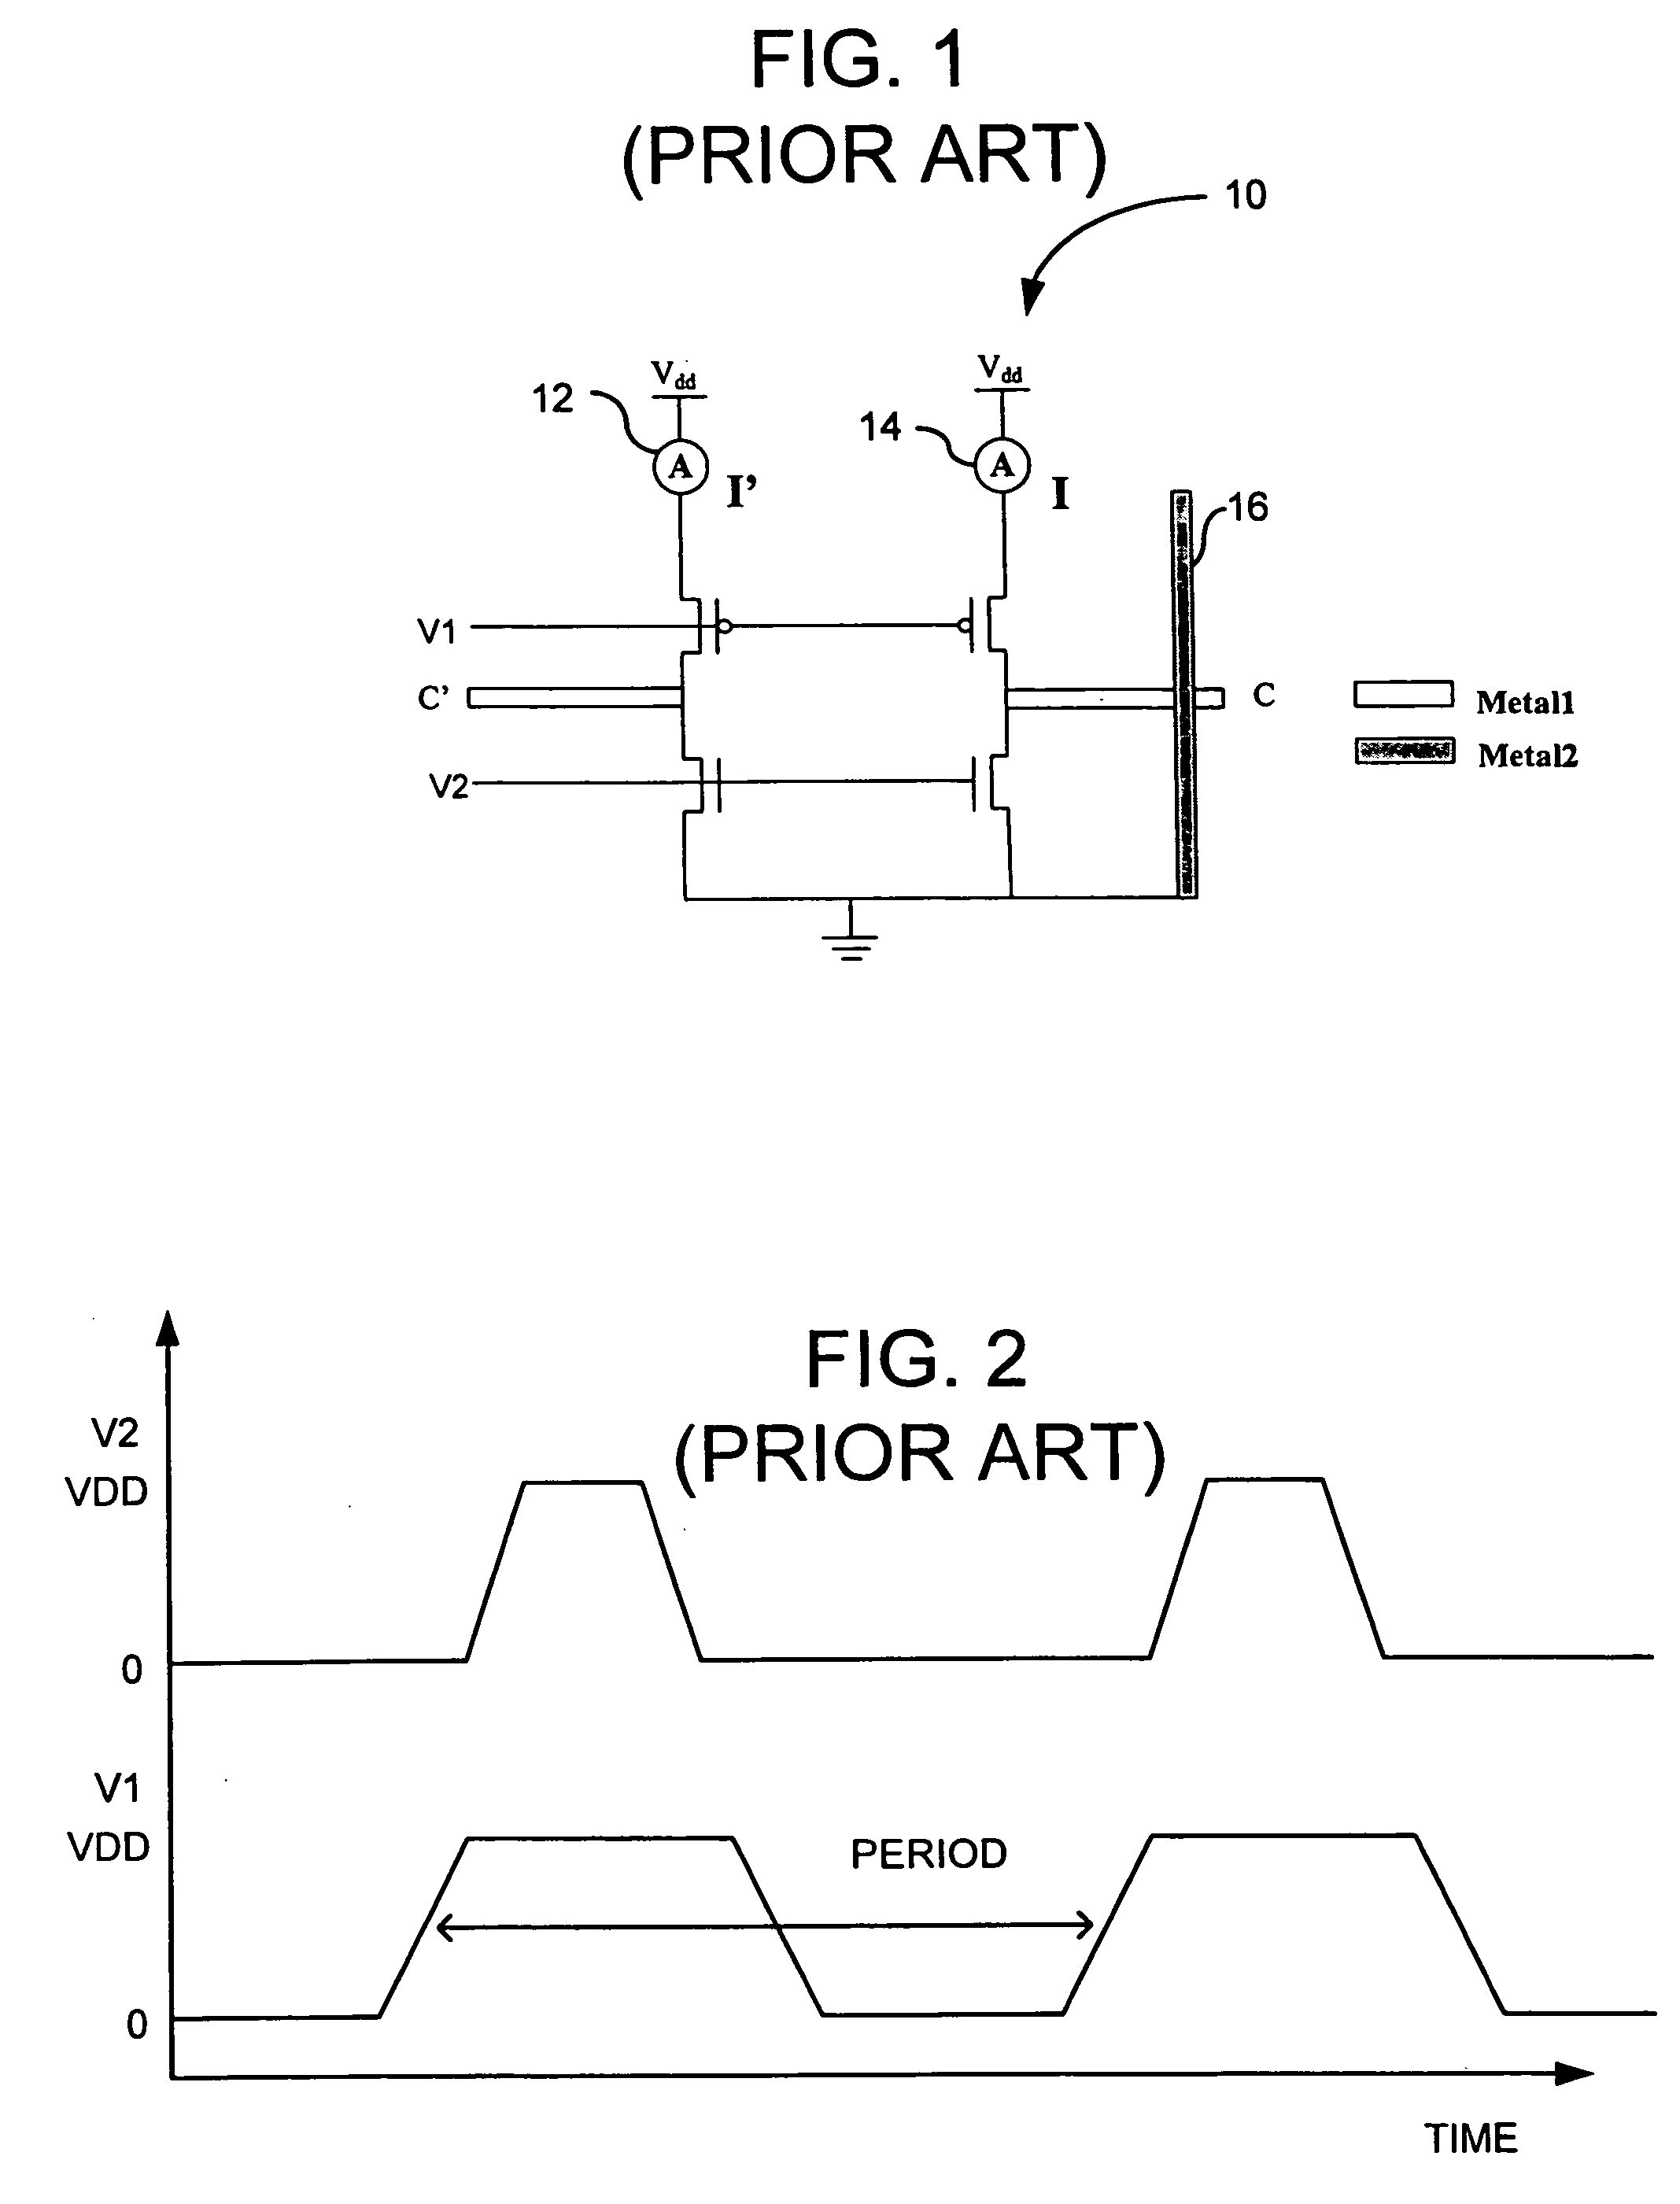 Capacitance measurements for an integrated circuit